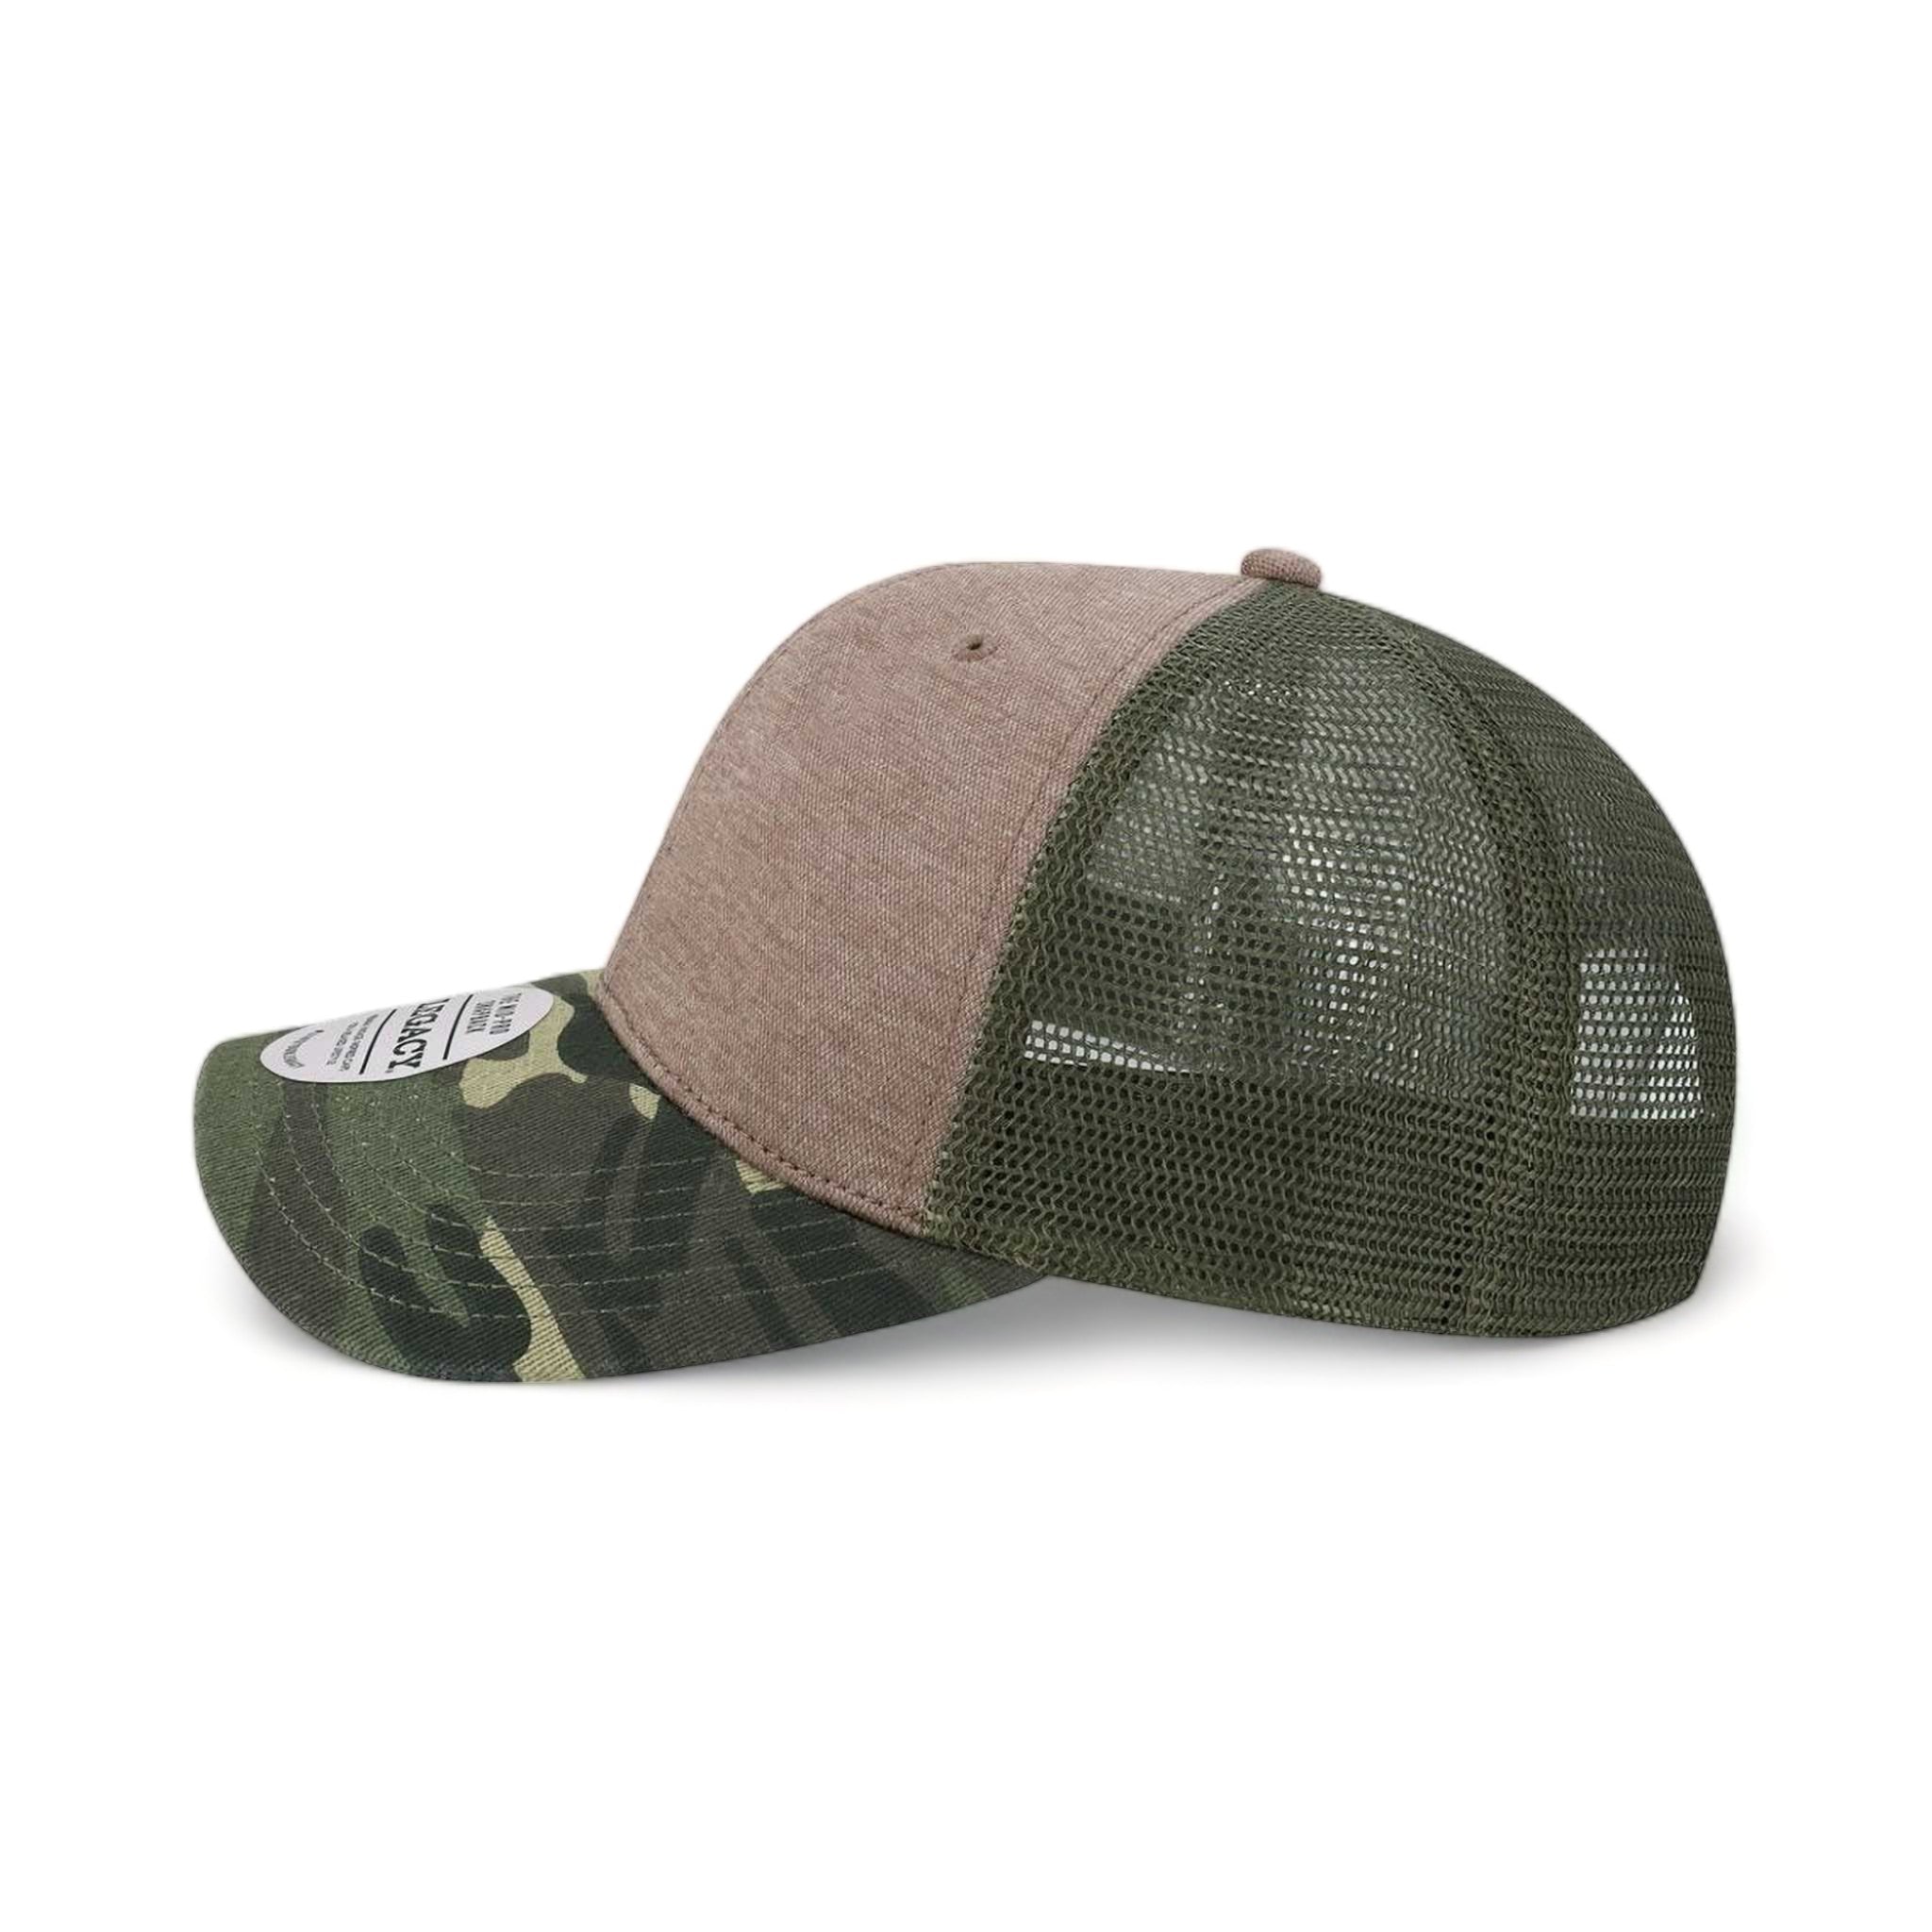 Side view of LEGACY MPS custom hat in brown and camo